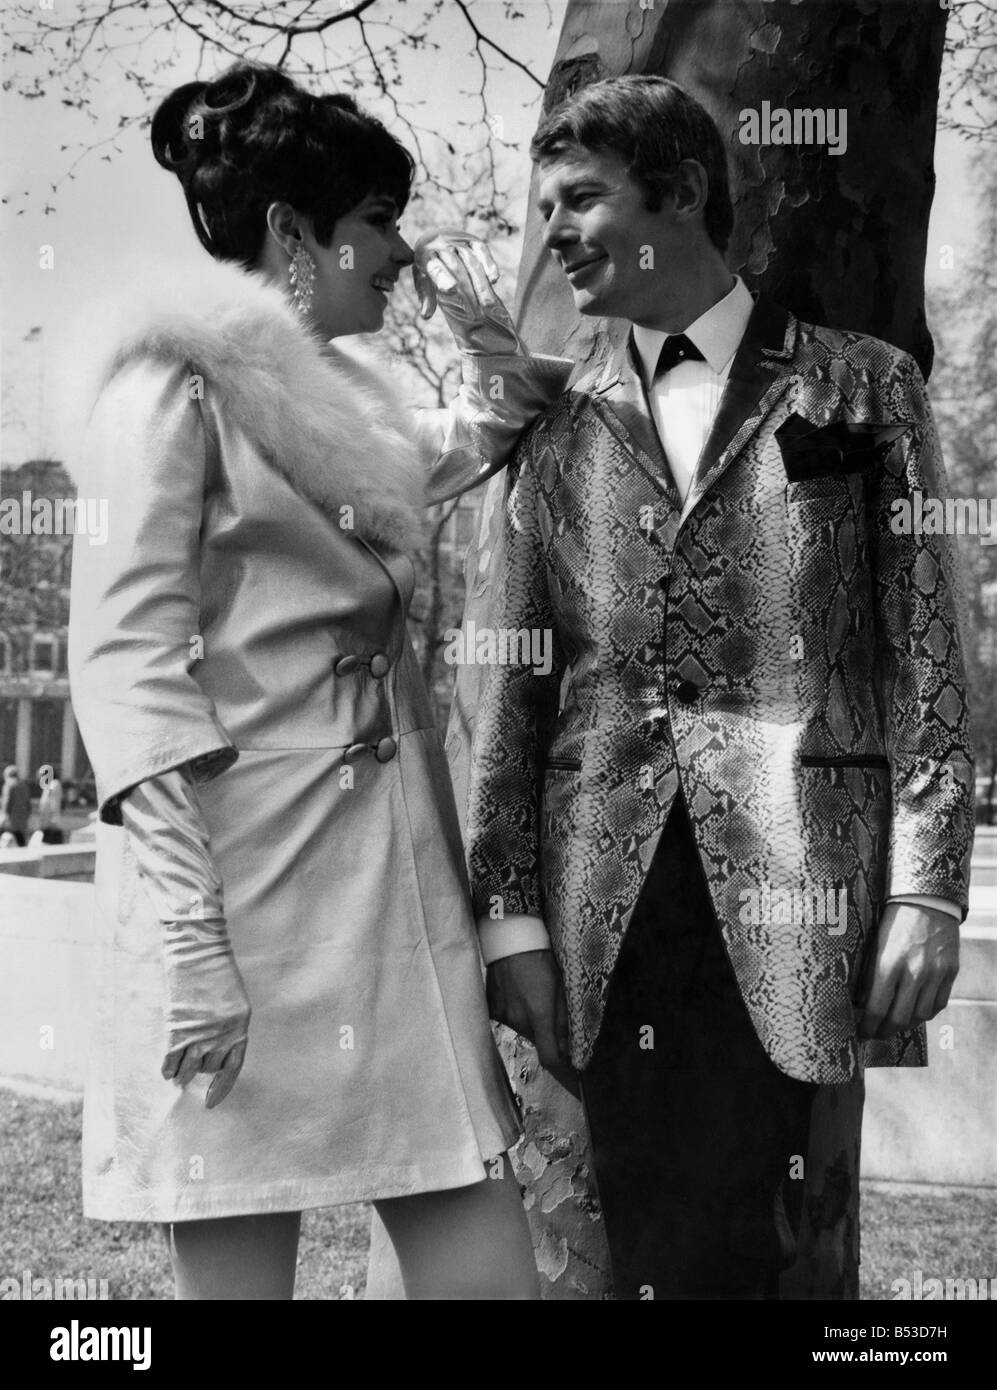 Fashion 1960's. On Monday (17-4-67) at the Europa Hotel, Grosvenor Square, the Leather Institute held its Annual leather fashion show. Thirteen models presented the new collection of 17 suede and leatherwear manufacturers. There were three fashion shows, for approximately 1,000 buyers from the UK and Overseas. Ralph Mutall wearing a python printed leather jacket and suede trousers by 'Newtone' and Nola Trolcar in a silver sheepskin coat and silver dress by John Homack. April 1967 P017557; Stock Photo